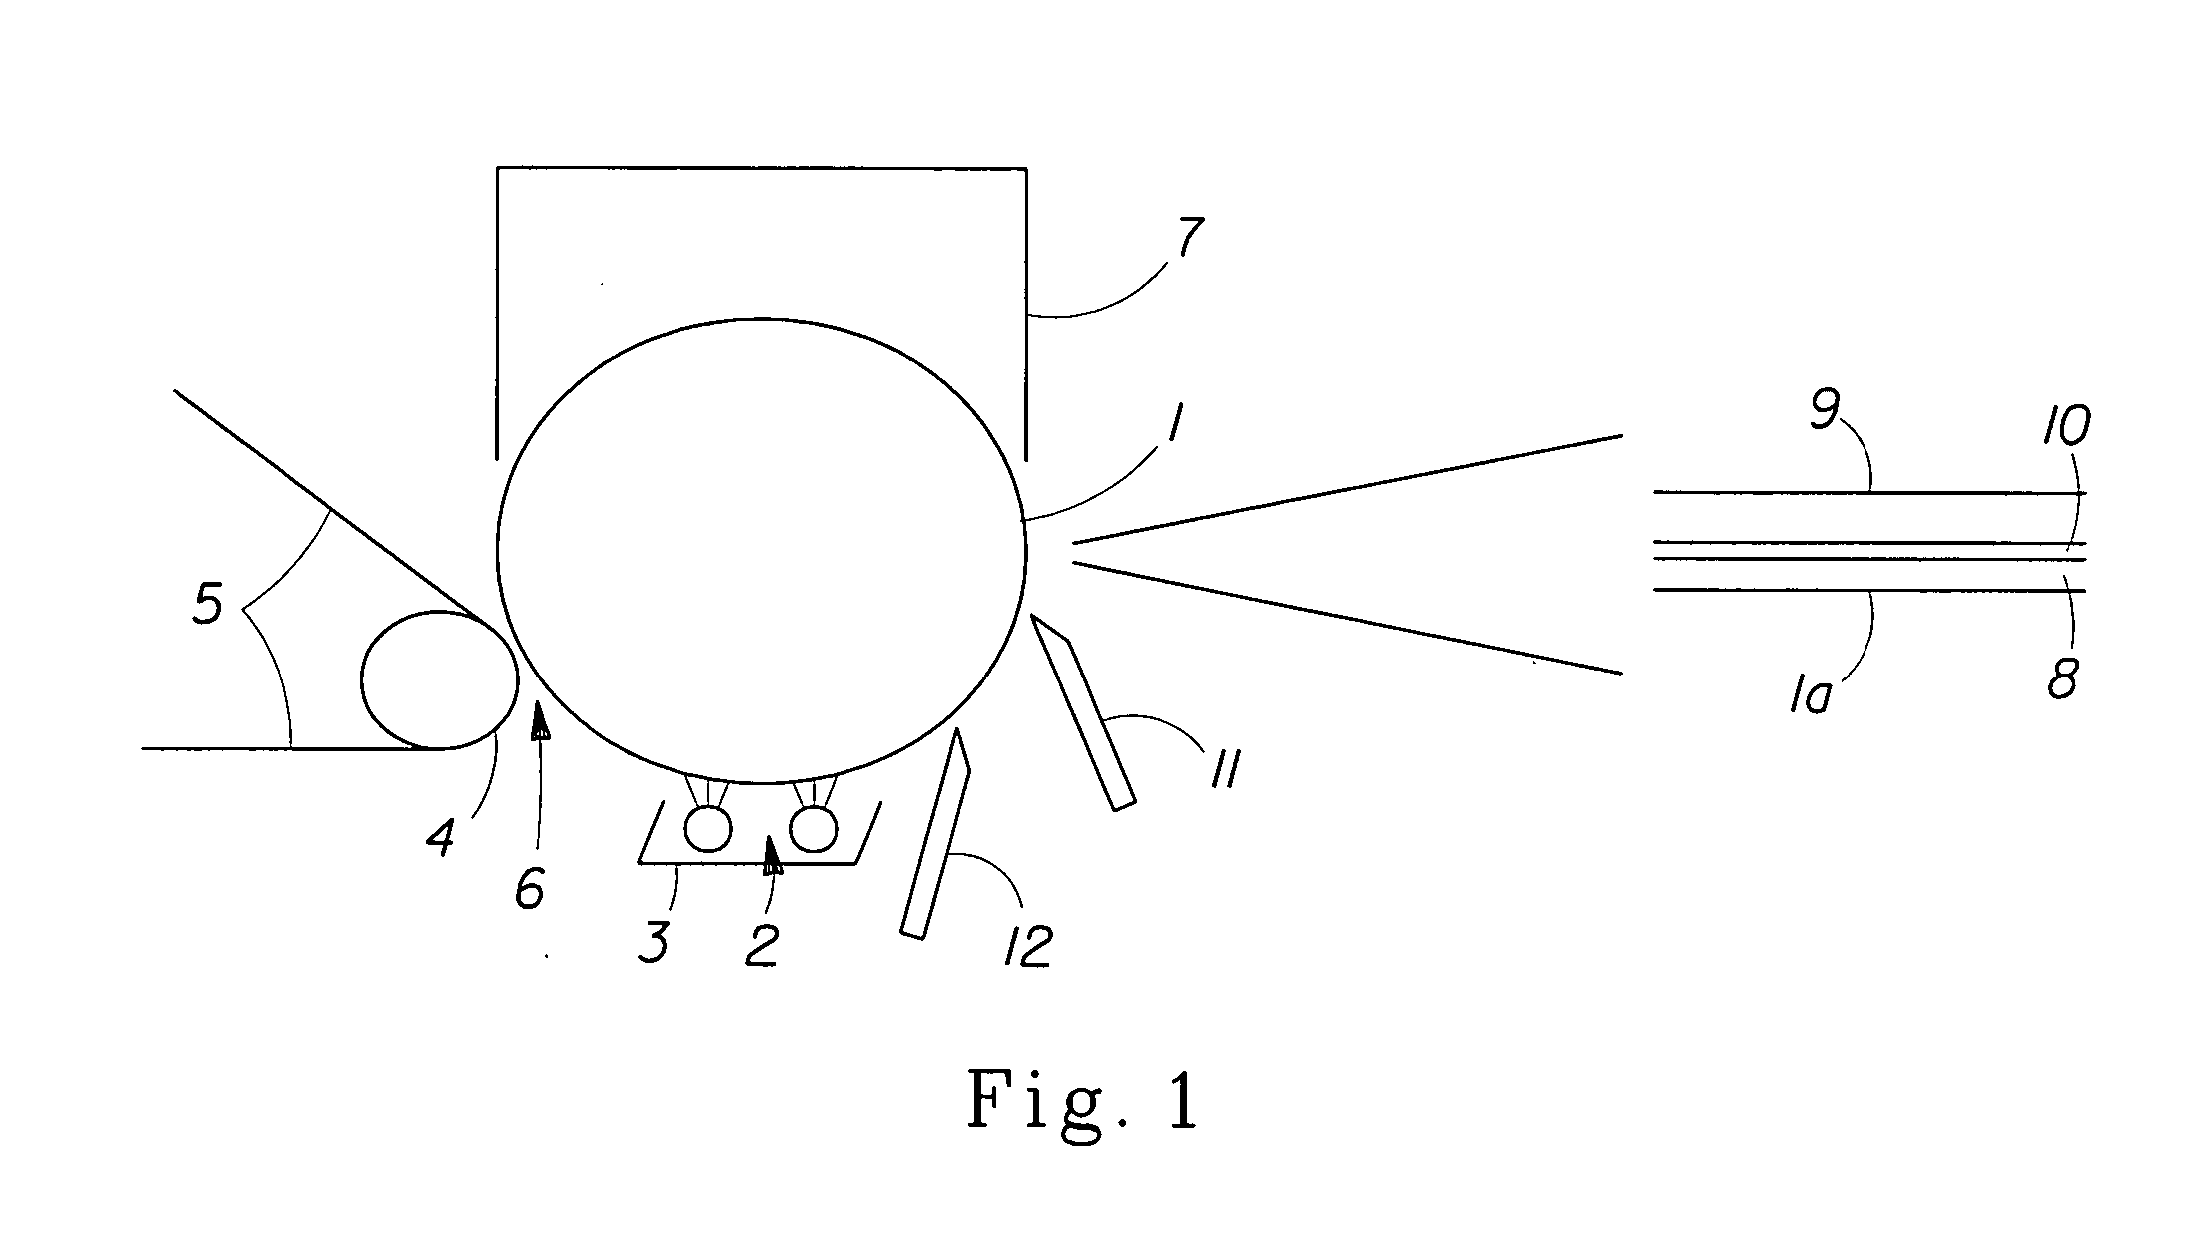 Creping aid composition and methods for producing paper products using that system